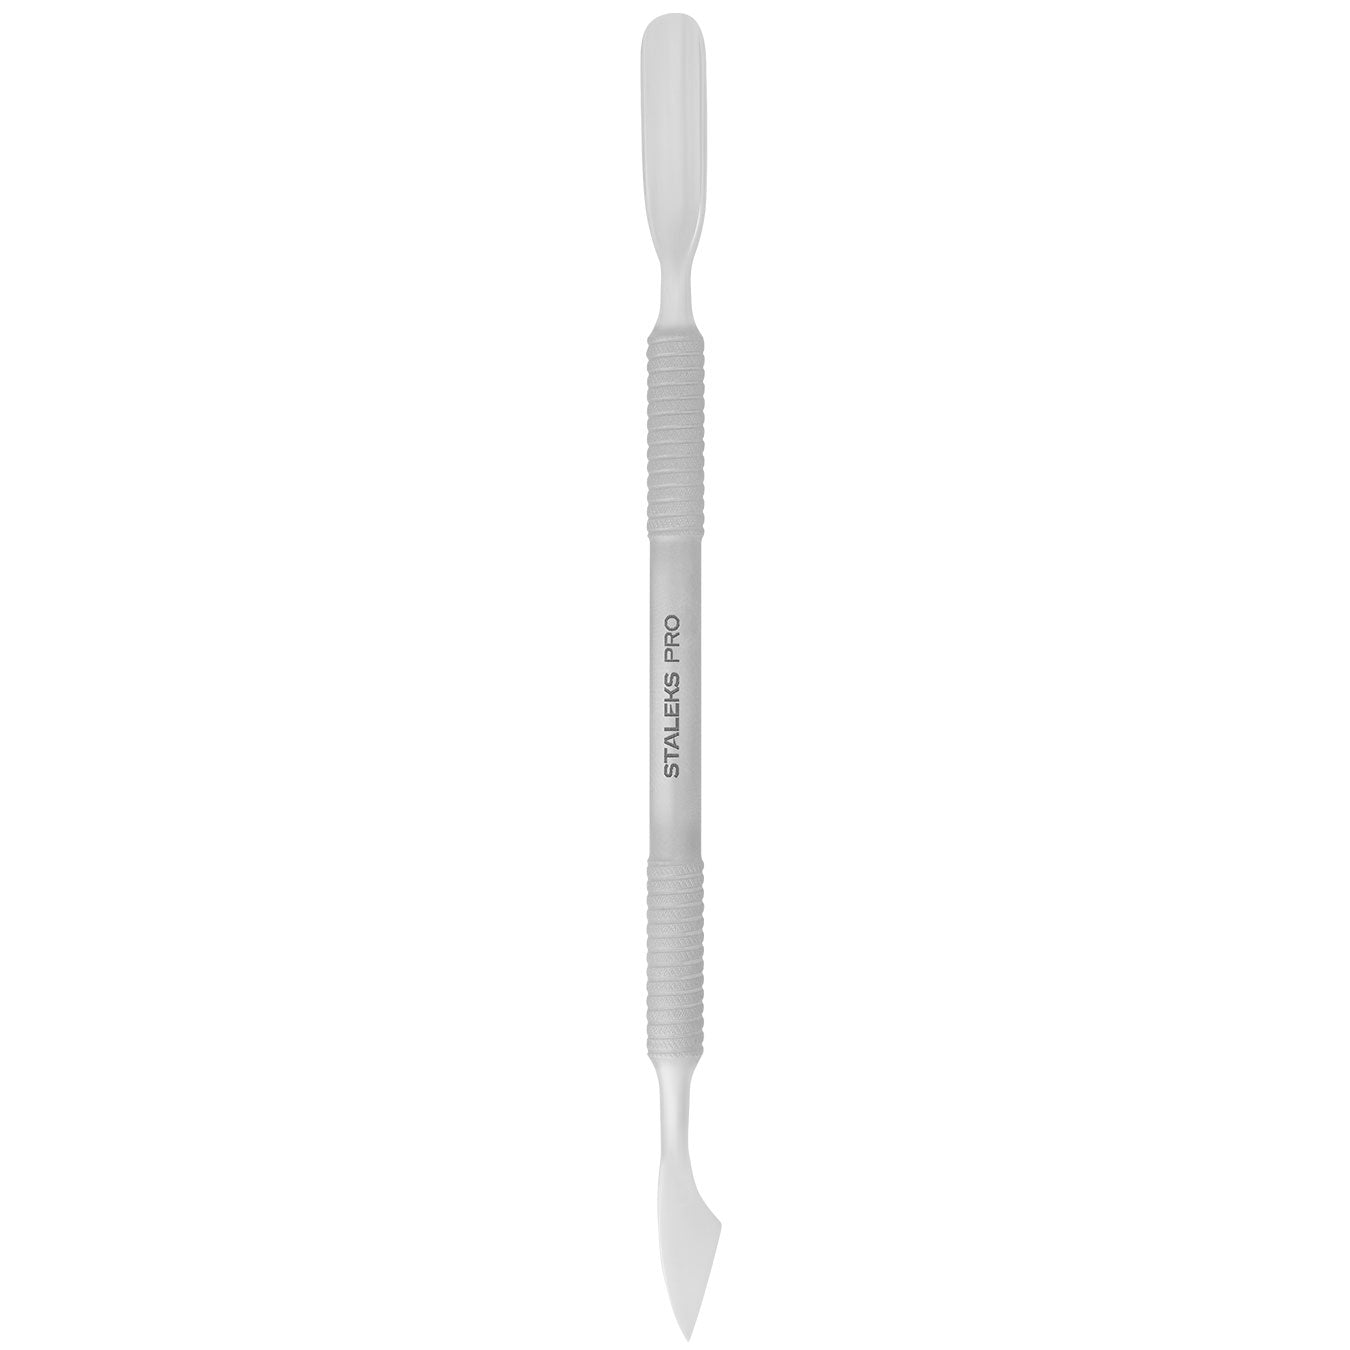 Staleks Pro Smart 50 Type 2 Cuticle Pusher (Rounded Pusher & Cleaner) PS-50/2